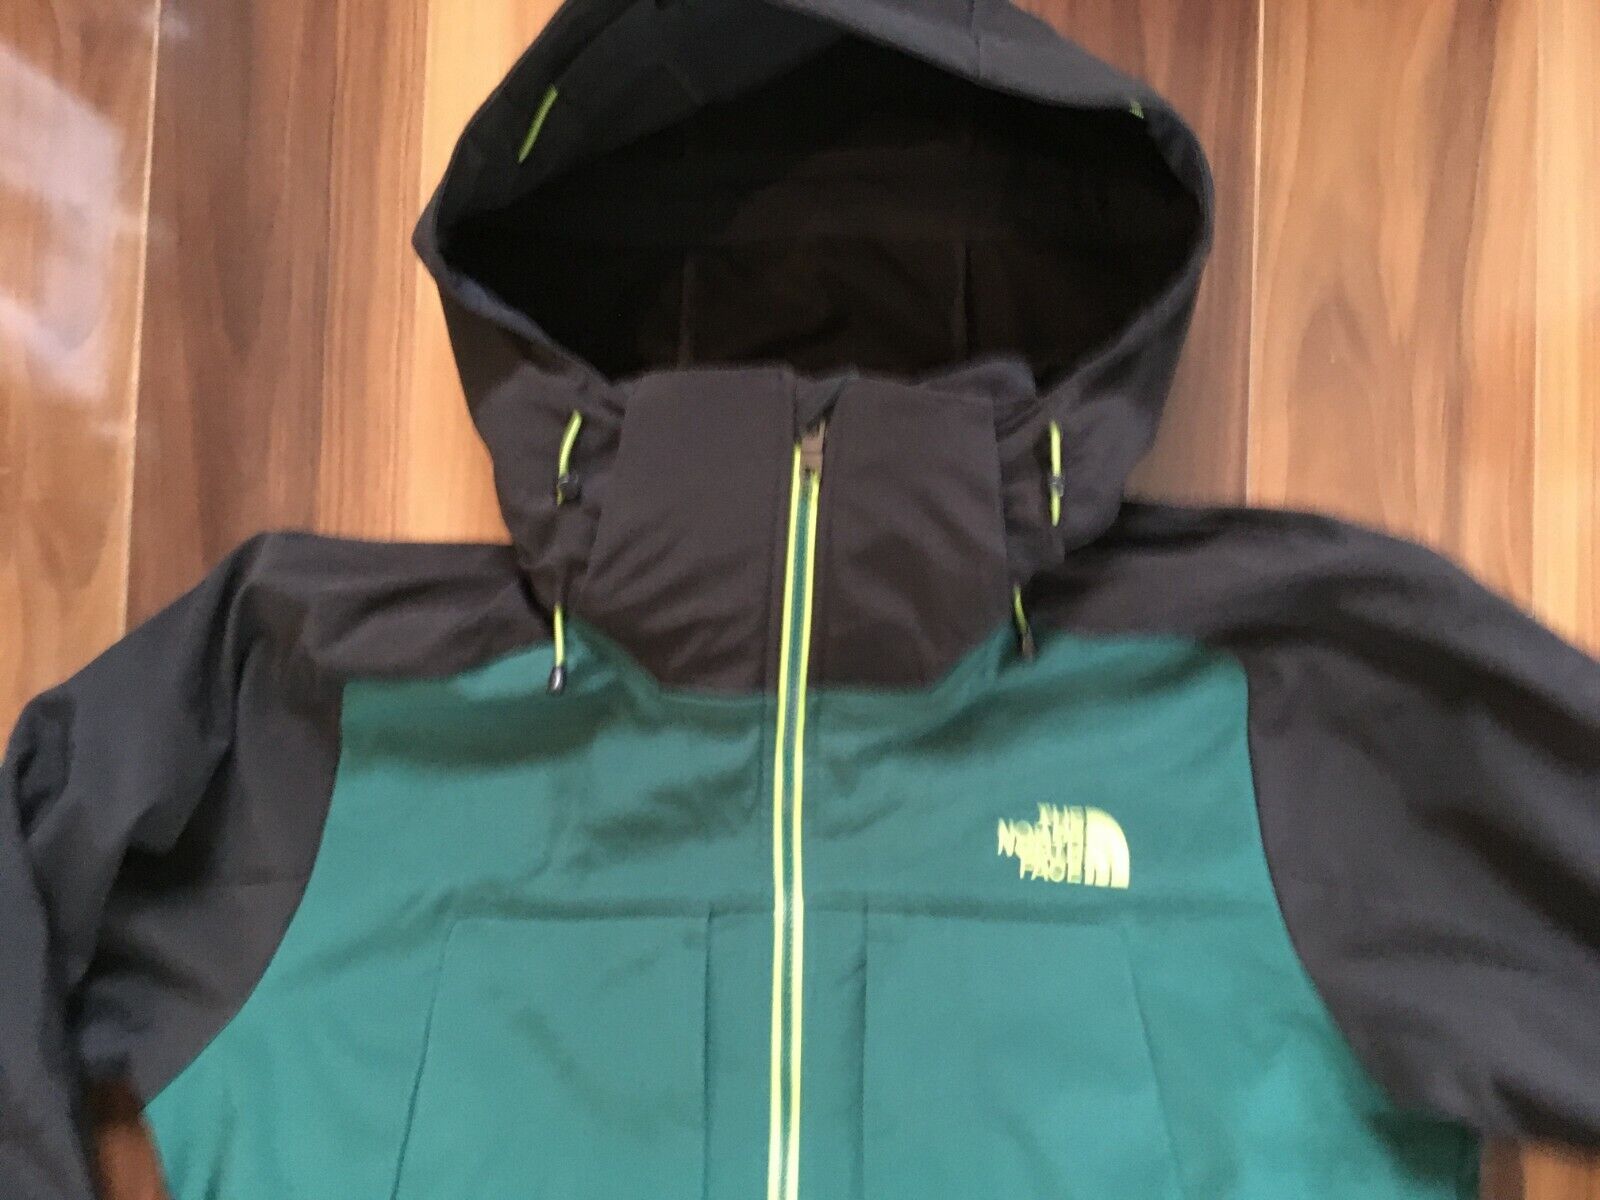 The North Face Men's Apex Storm Peak Triclimate Jacket 3 in 1 Green SZ M  $300